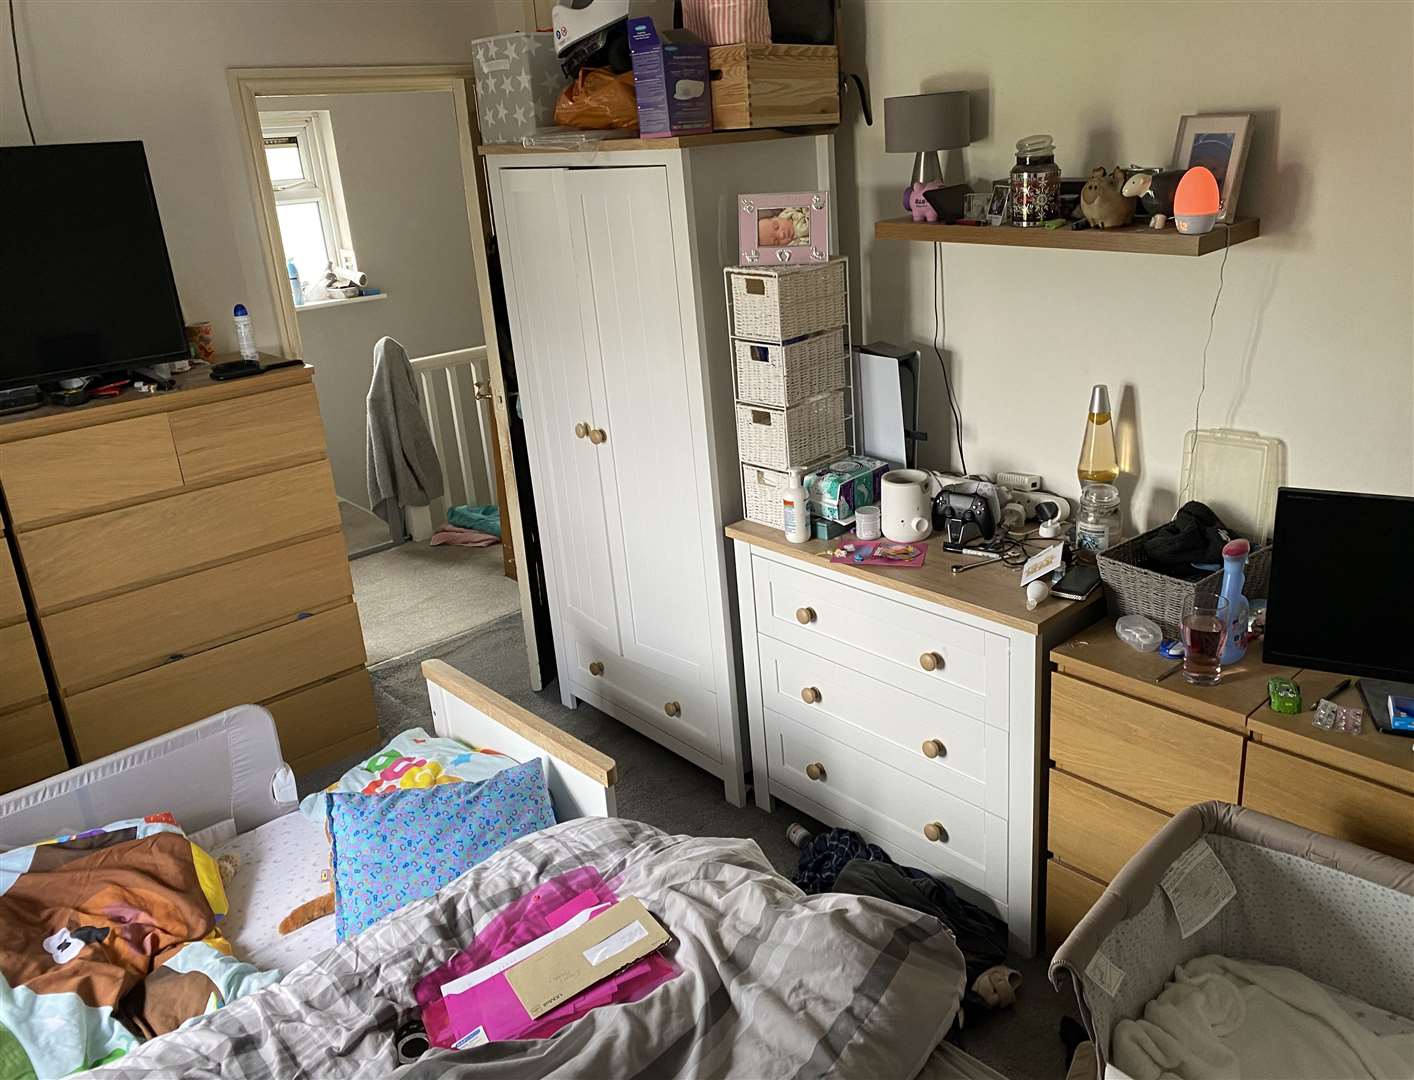 Cherina Turley has been waiting on the social housing list for more than two years in Gravesend Photo: Cherina Turley